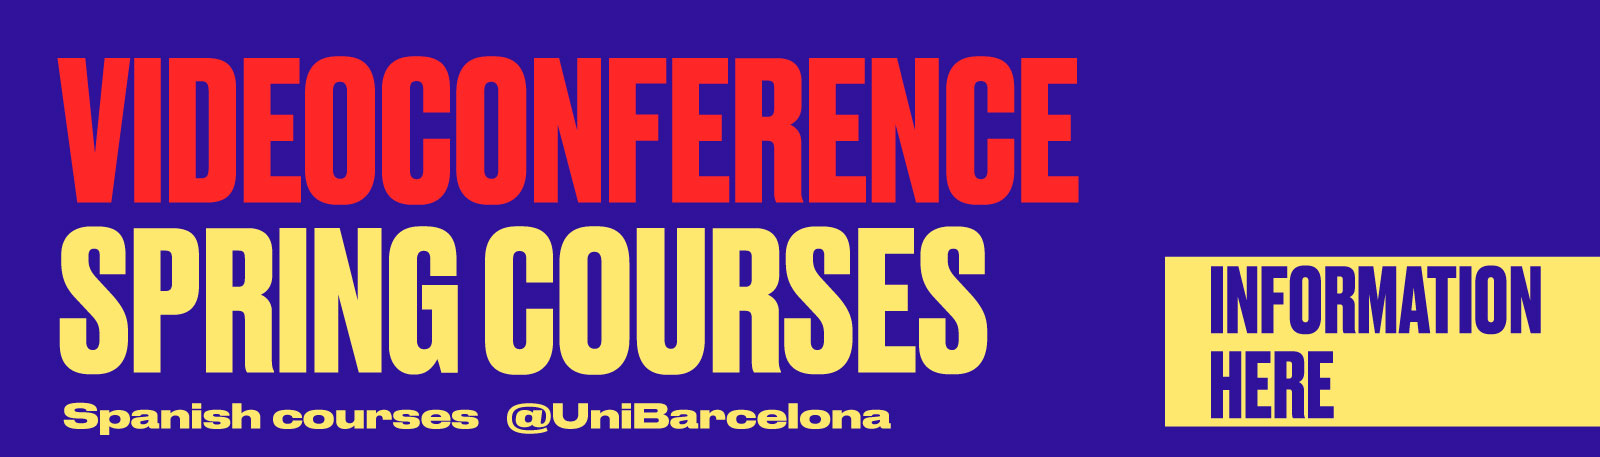 SPANIFY - Videoconference spring courses